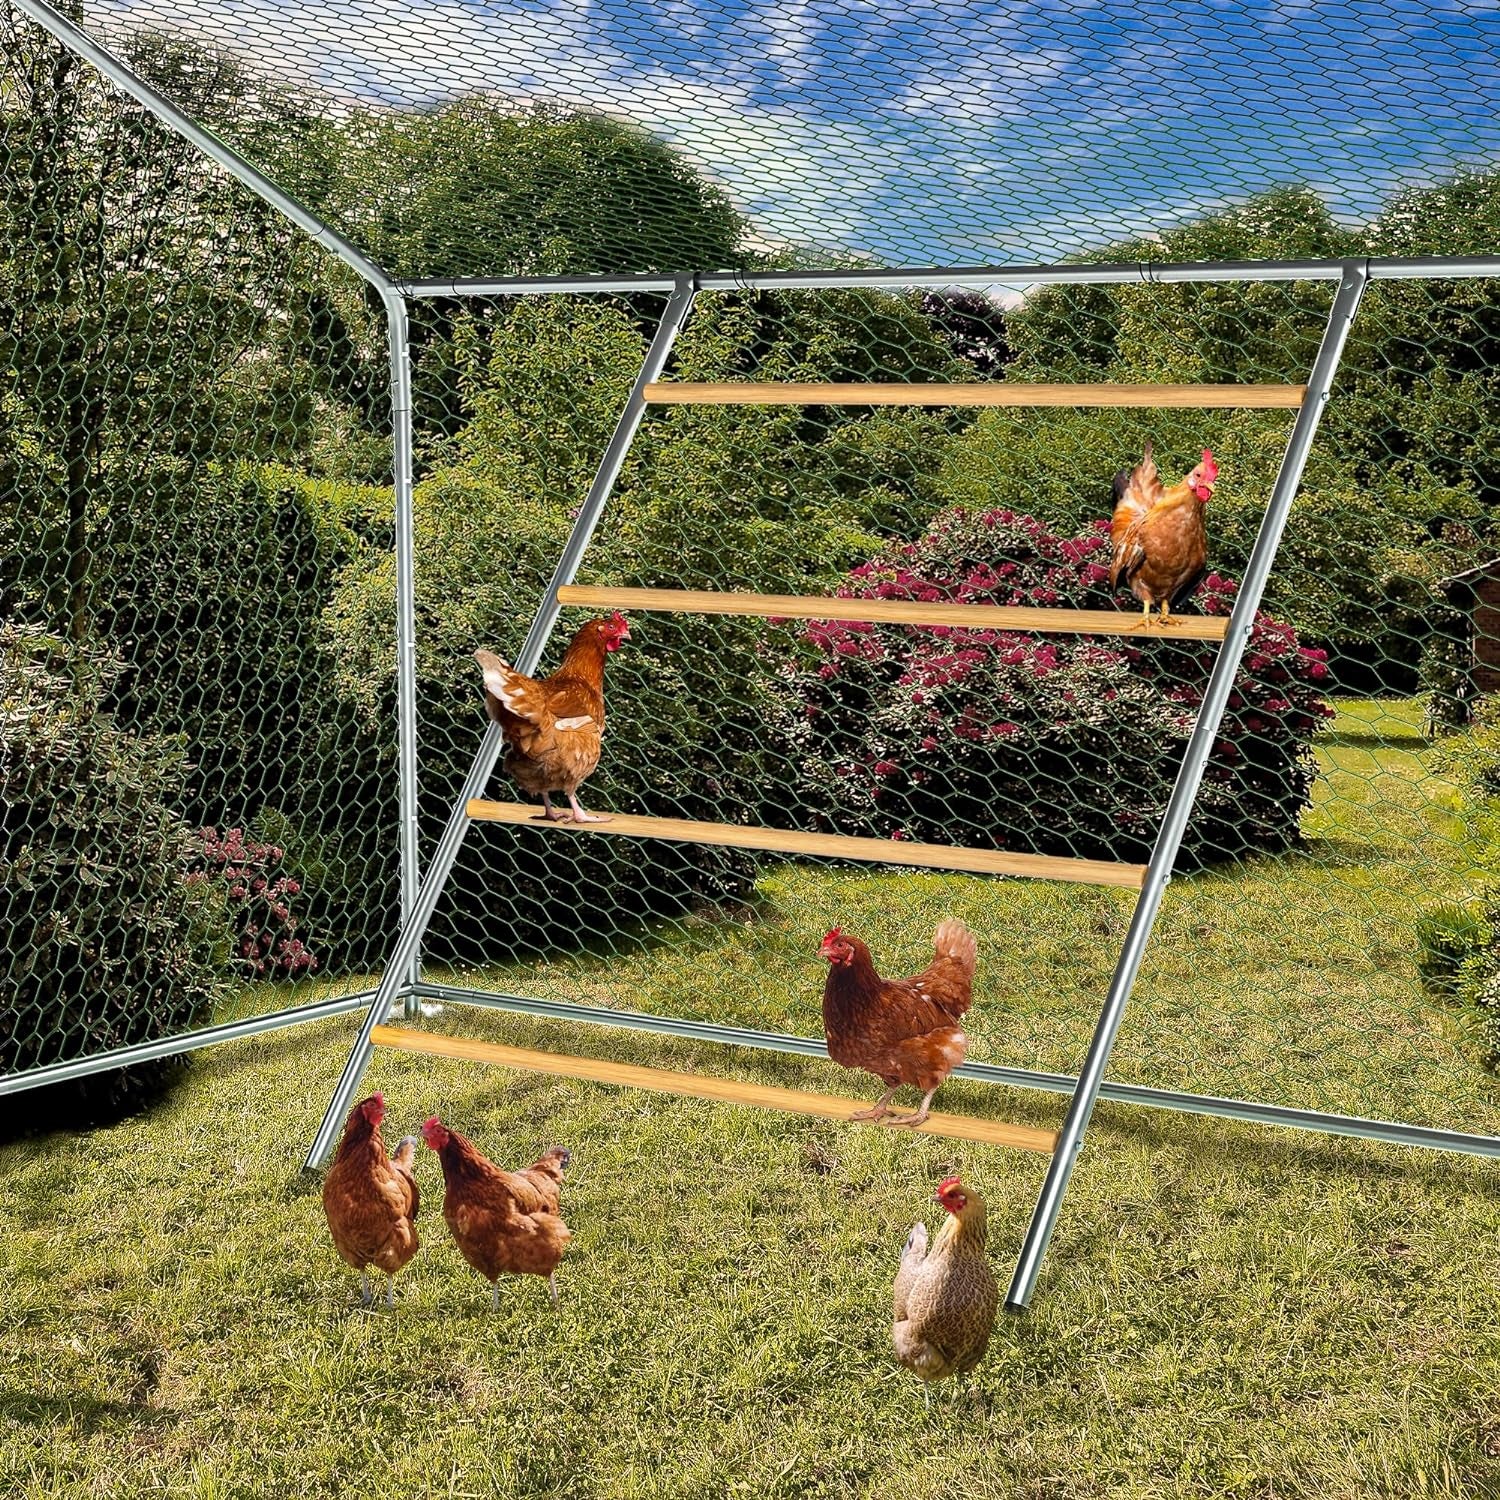 Chicken Coop Roosting Perch Essentials：Perfect for Backyard Poultry, Easy Installation &,Farm Roost Toys for Chickens (55' L X 40' W)